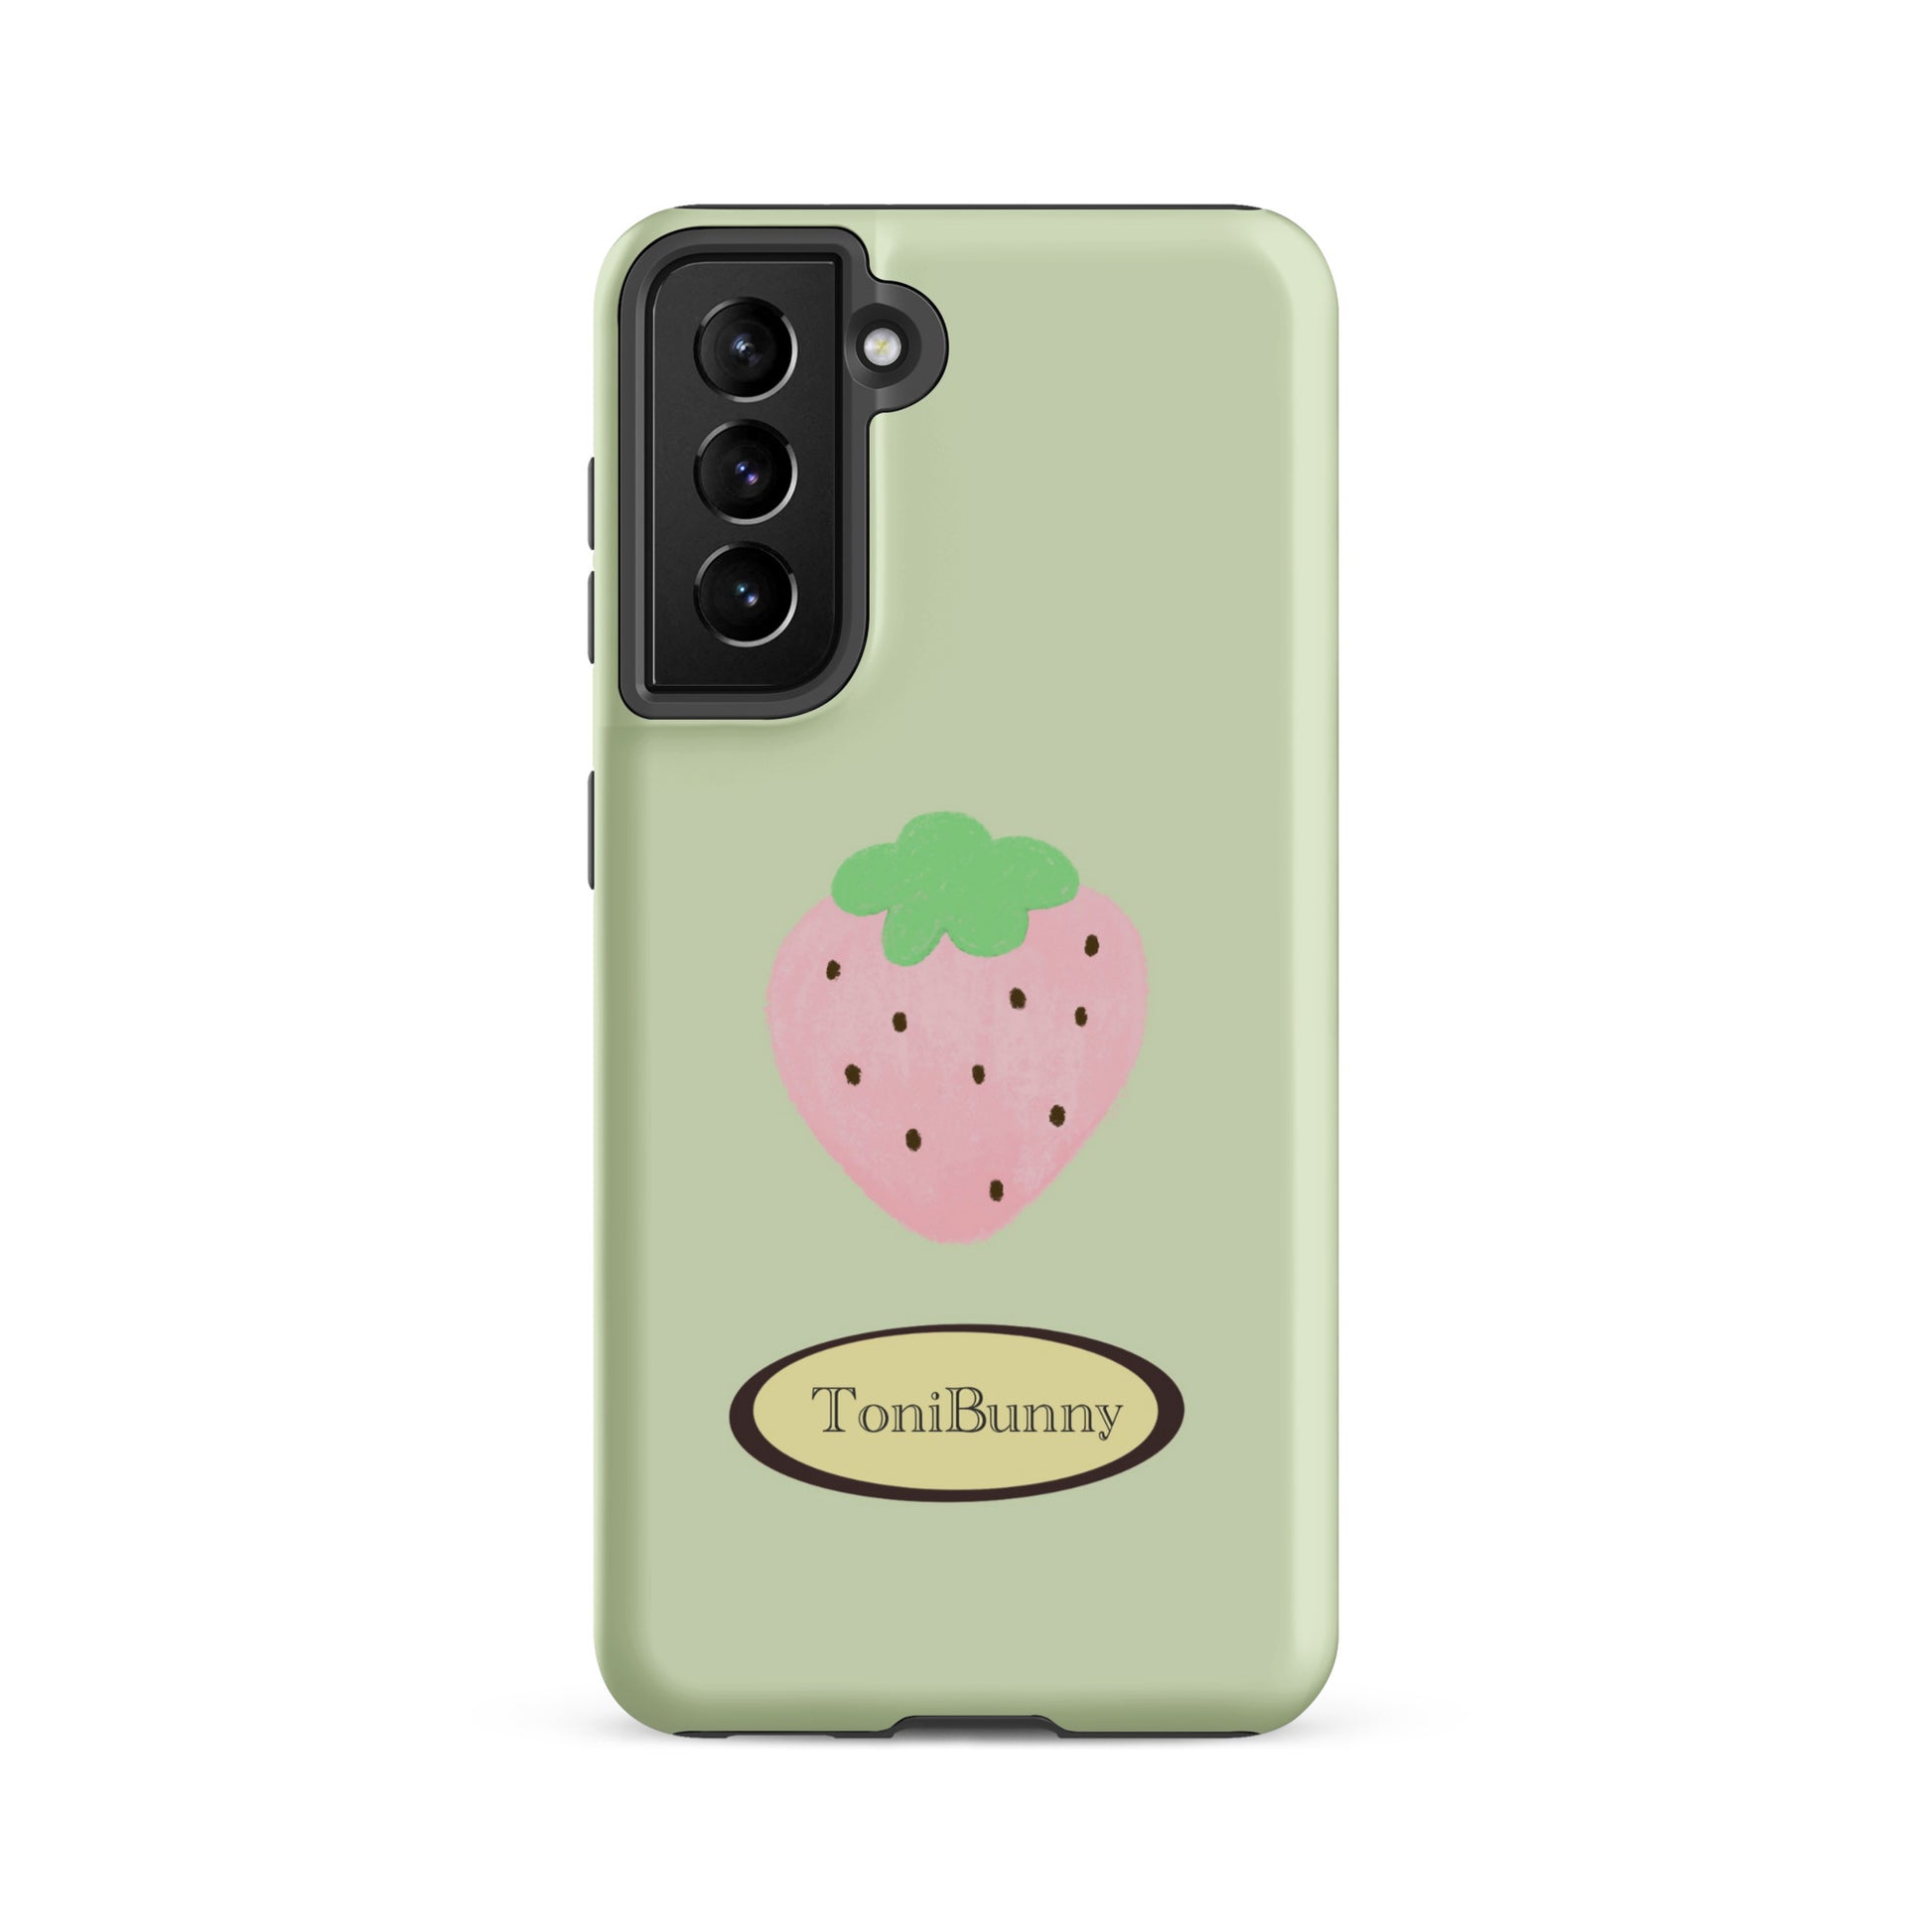 Phone Cases for Samsung